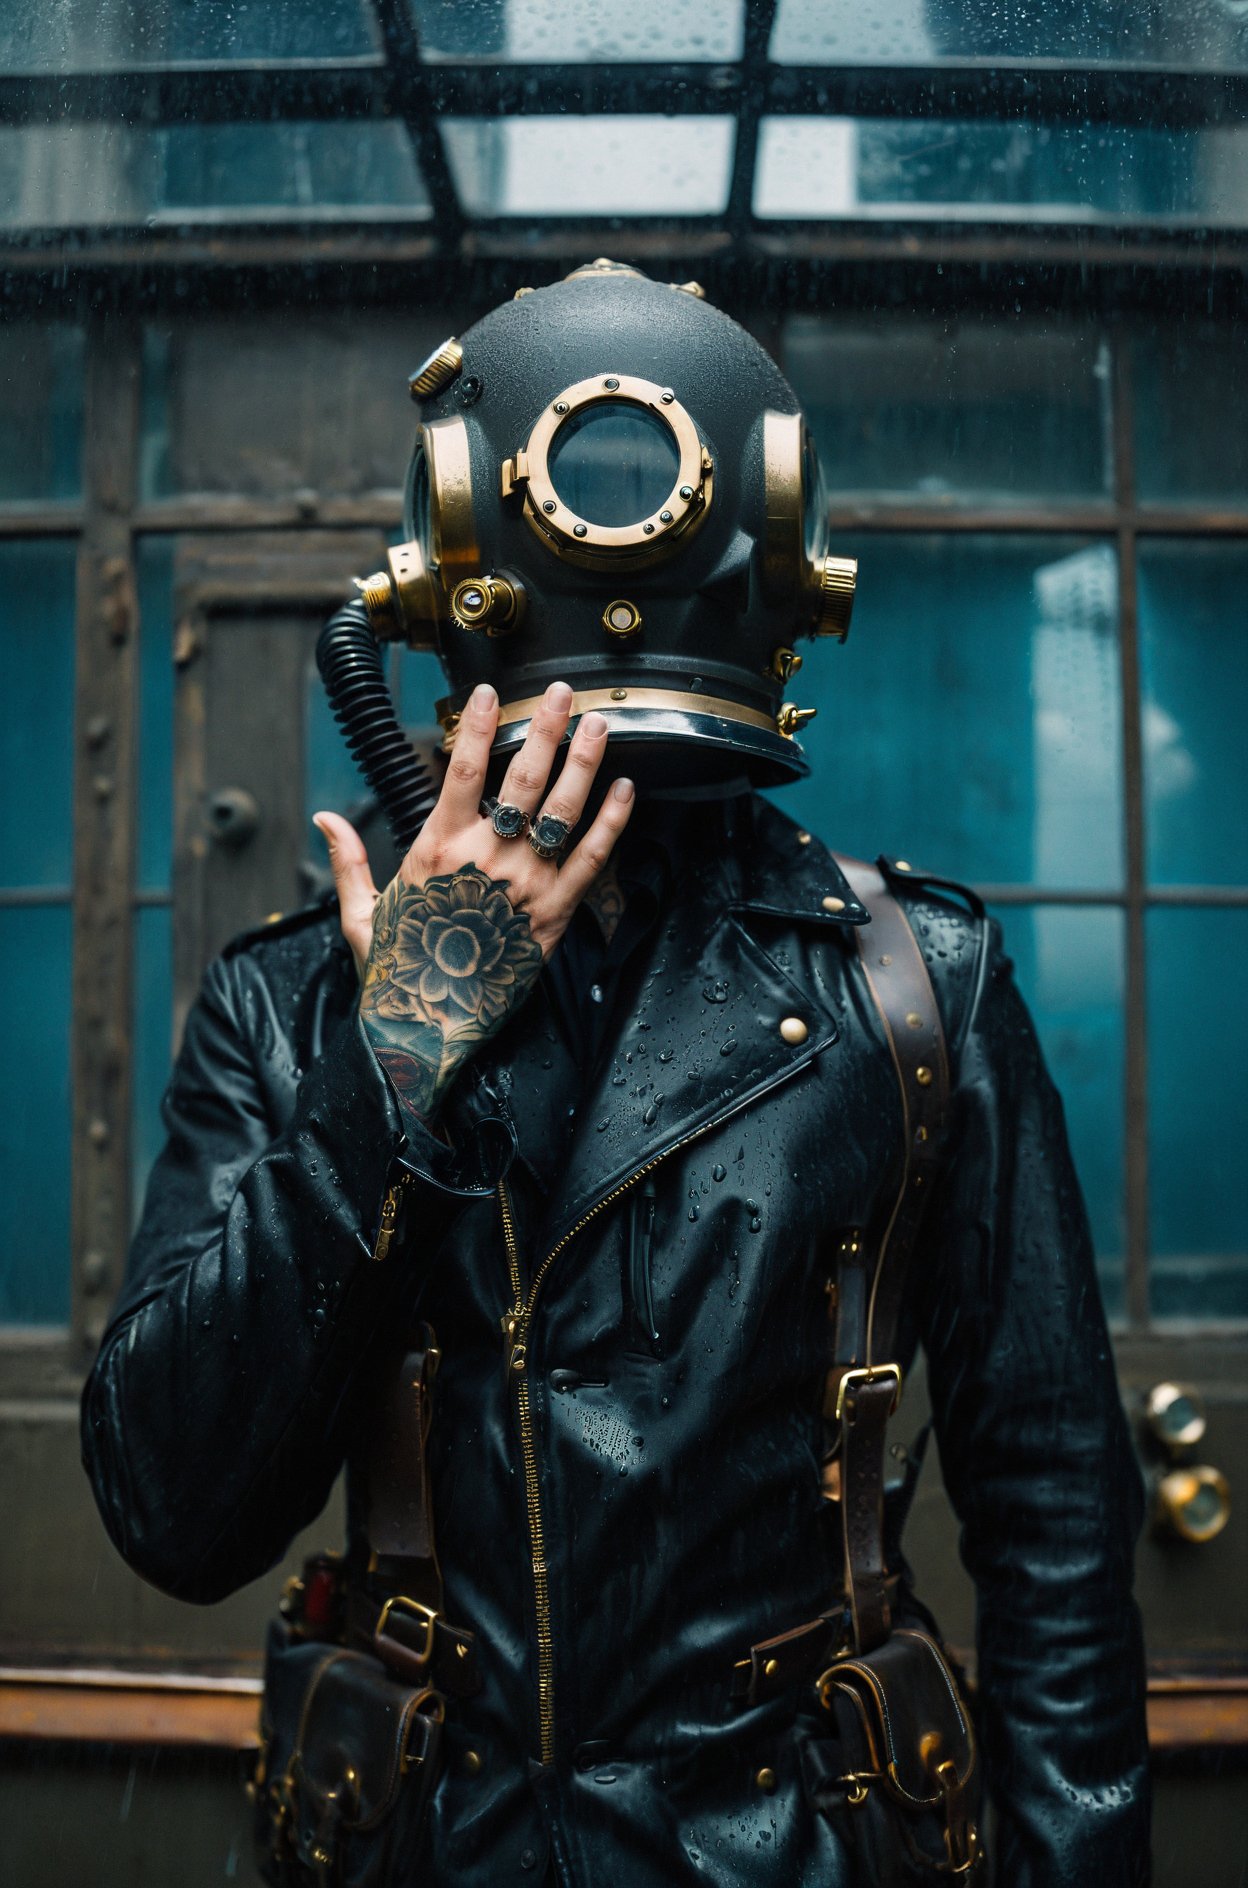 film aesthetic,Surreal portrait, man in vintage diver's helmet, glass portholes obscuring face, rain-soaked ambiance, urban backdrop, modern tattooed hand juxtaposed with retro gear, slick black jacket, metallic textures contrasting wet skin, moody blues and grays dominate color palette, evoking a somber, dystopian vibe, deeply atmospheric, cinematic quality, hints of steampunk influence, stylistic blend of historical and contemporary elements.,Intimate boudoir photography,